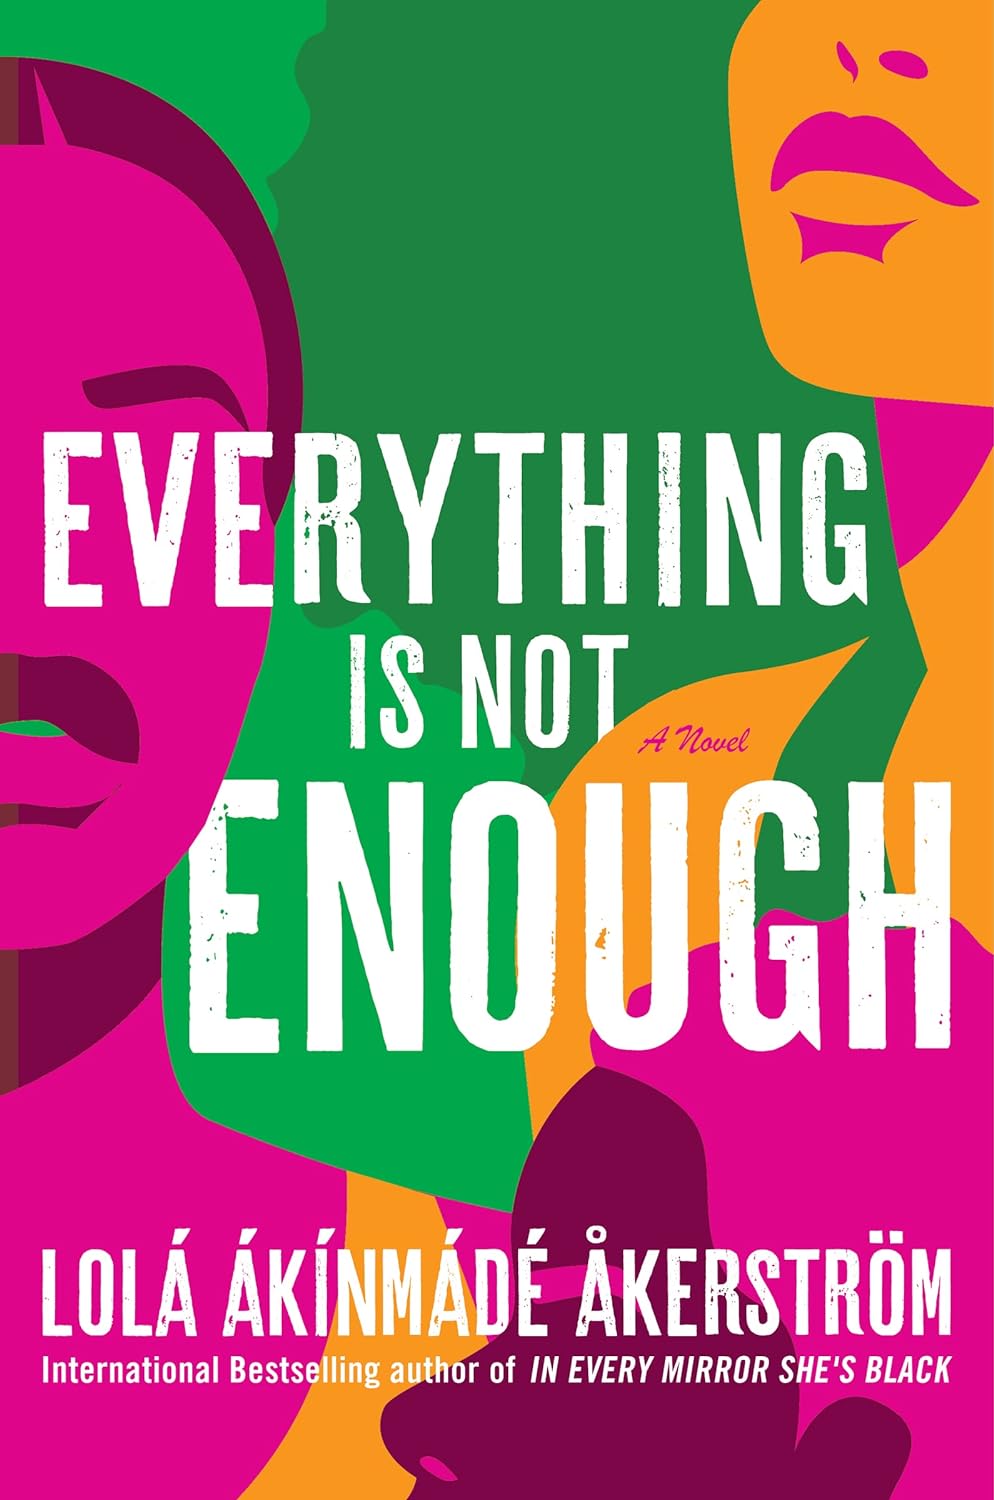 Image for "Everything Is Not Enough"